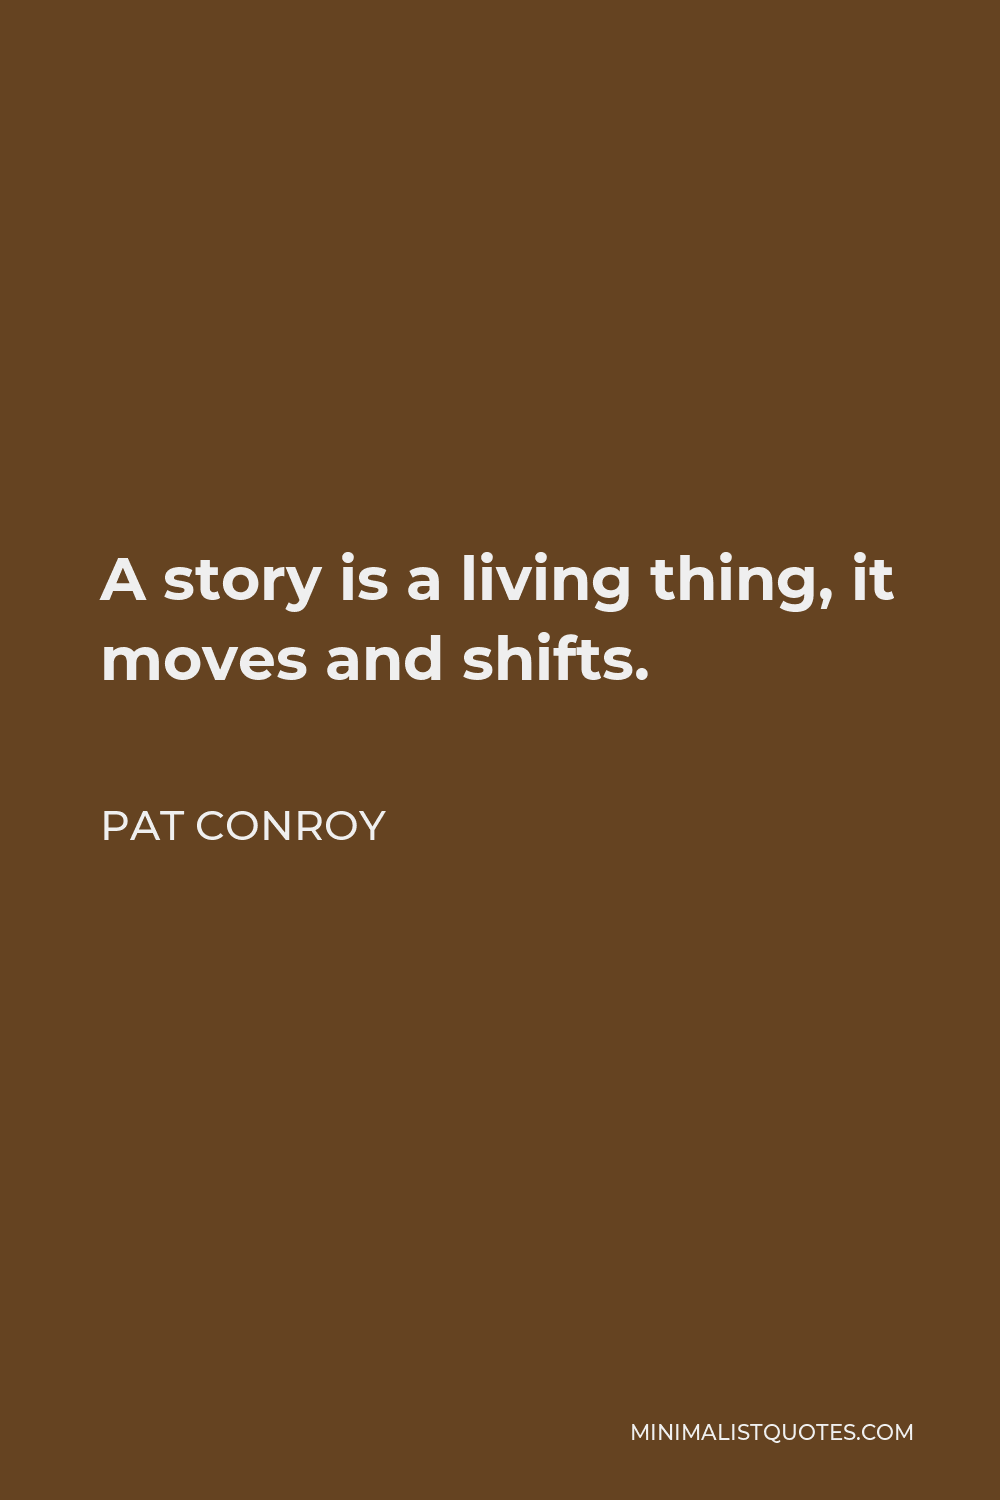 Pat Conroy Quote - A story is a living thing, it moves and shifts.